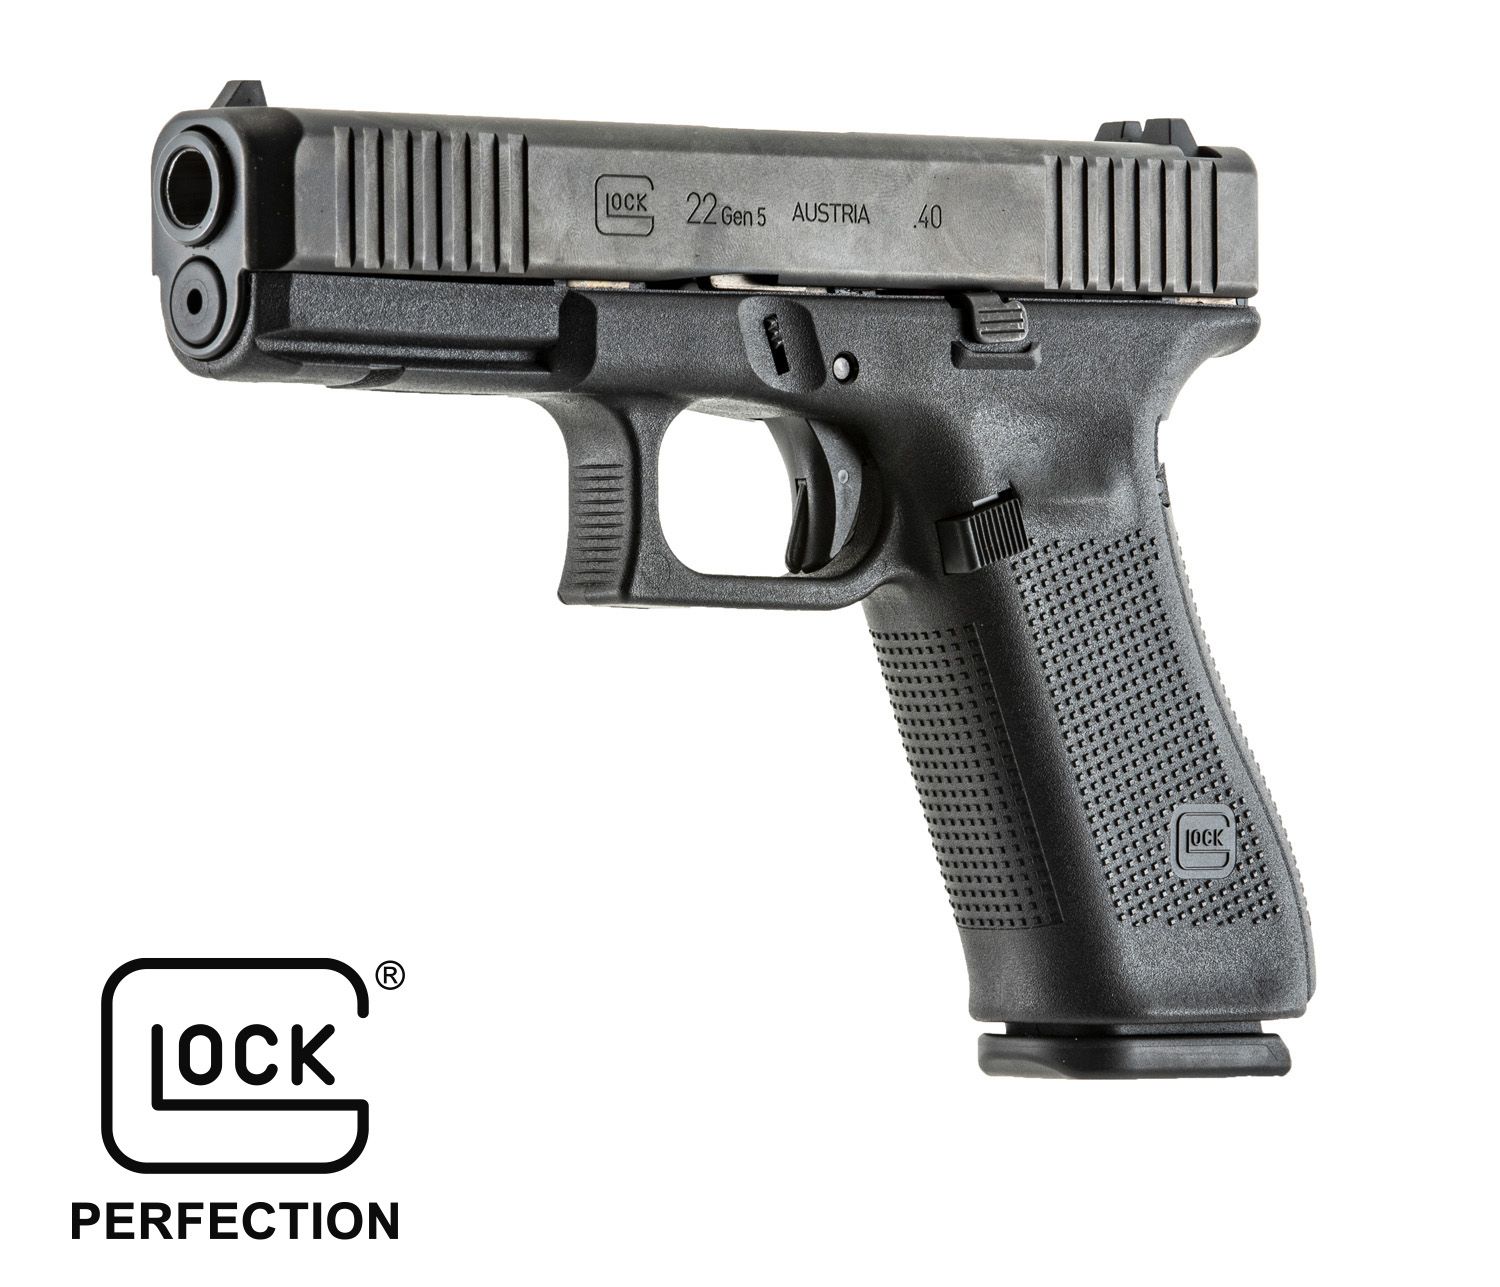 GLOCK 22 Gen5 The 40 S&W caliber closes the gap between the .45 Auto  calibers and the 9x19 service calibers. The G22 is now available with Gen5  technologies including the nDLC finish